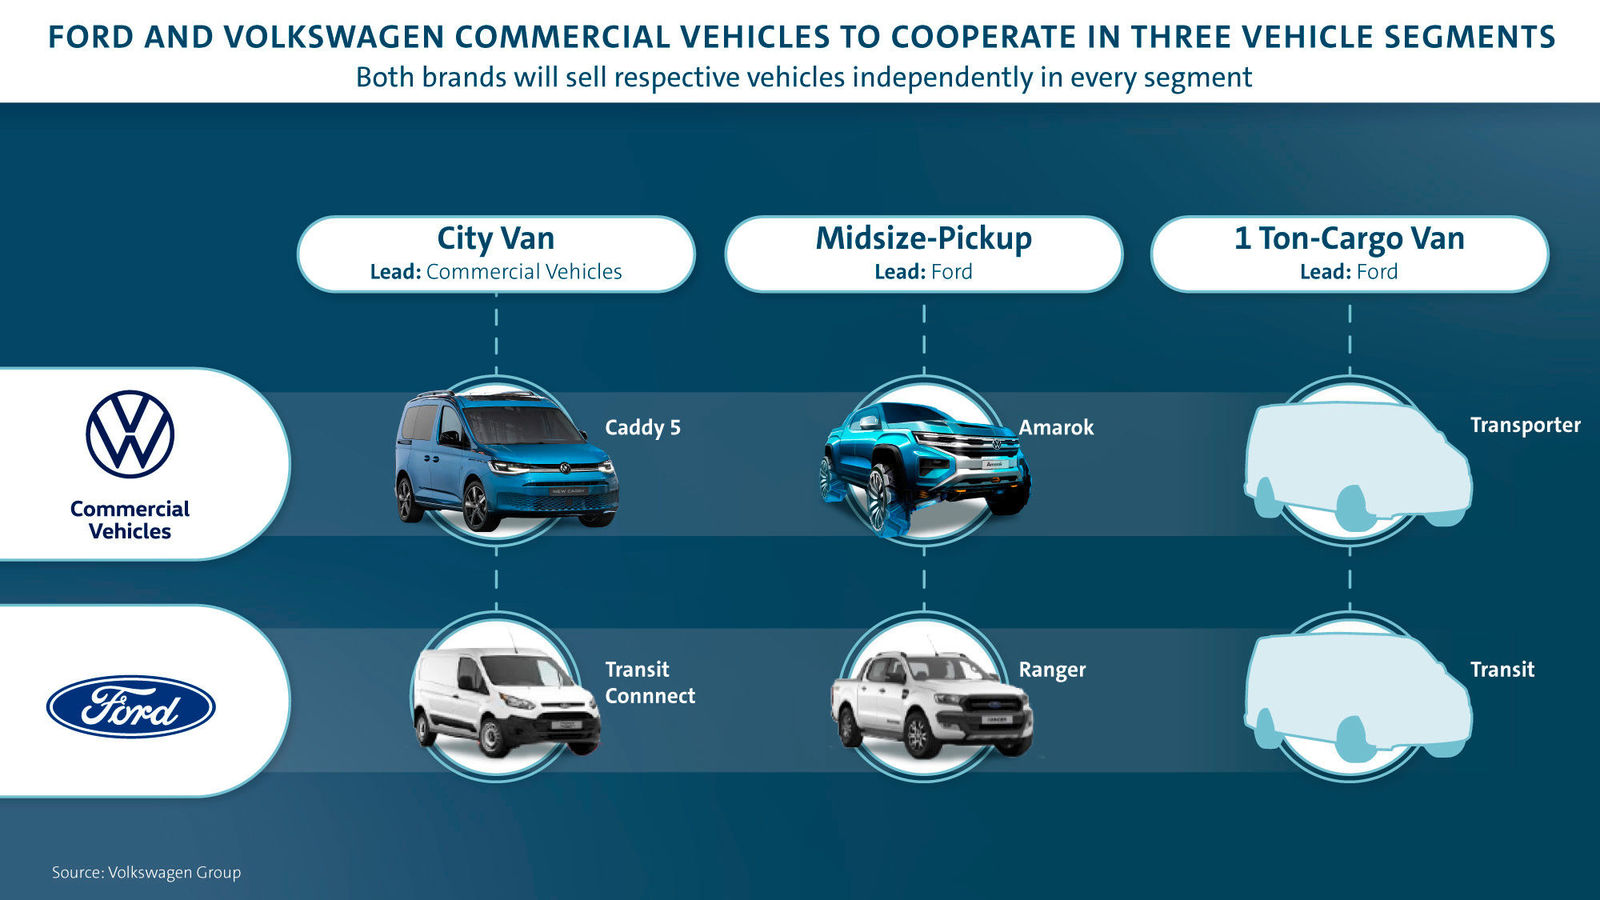 Ford, Volkswagen Sign Agreements for Joint Projects On Commercial Vehicles, Electrification, Autonomous Driving